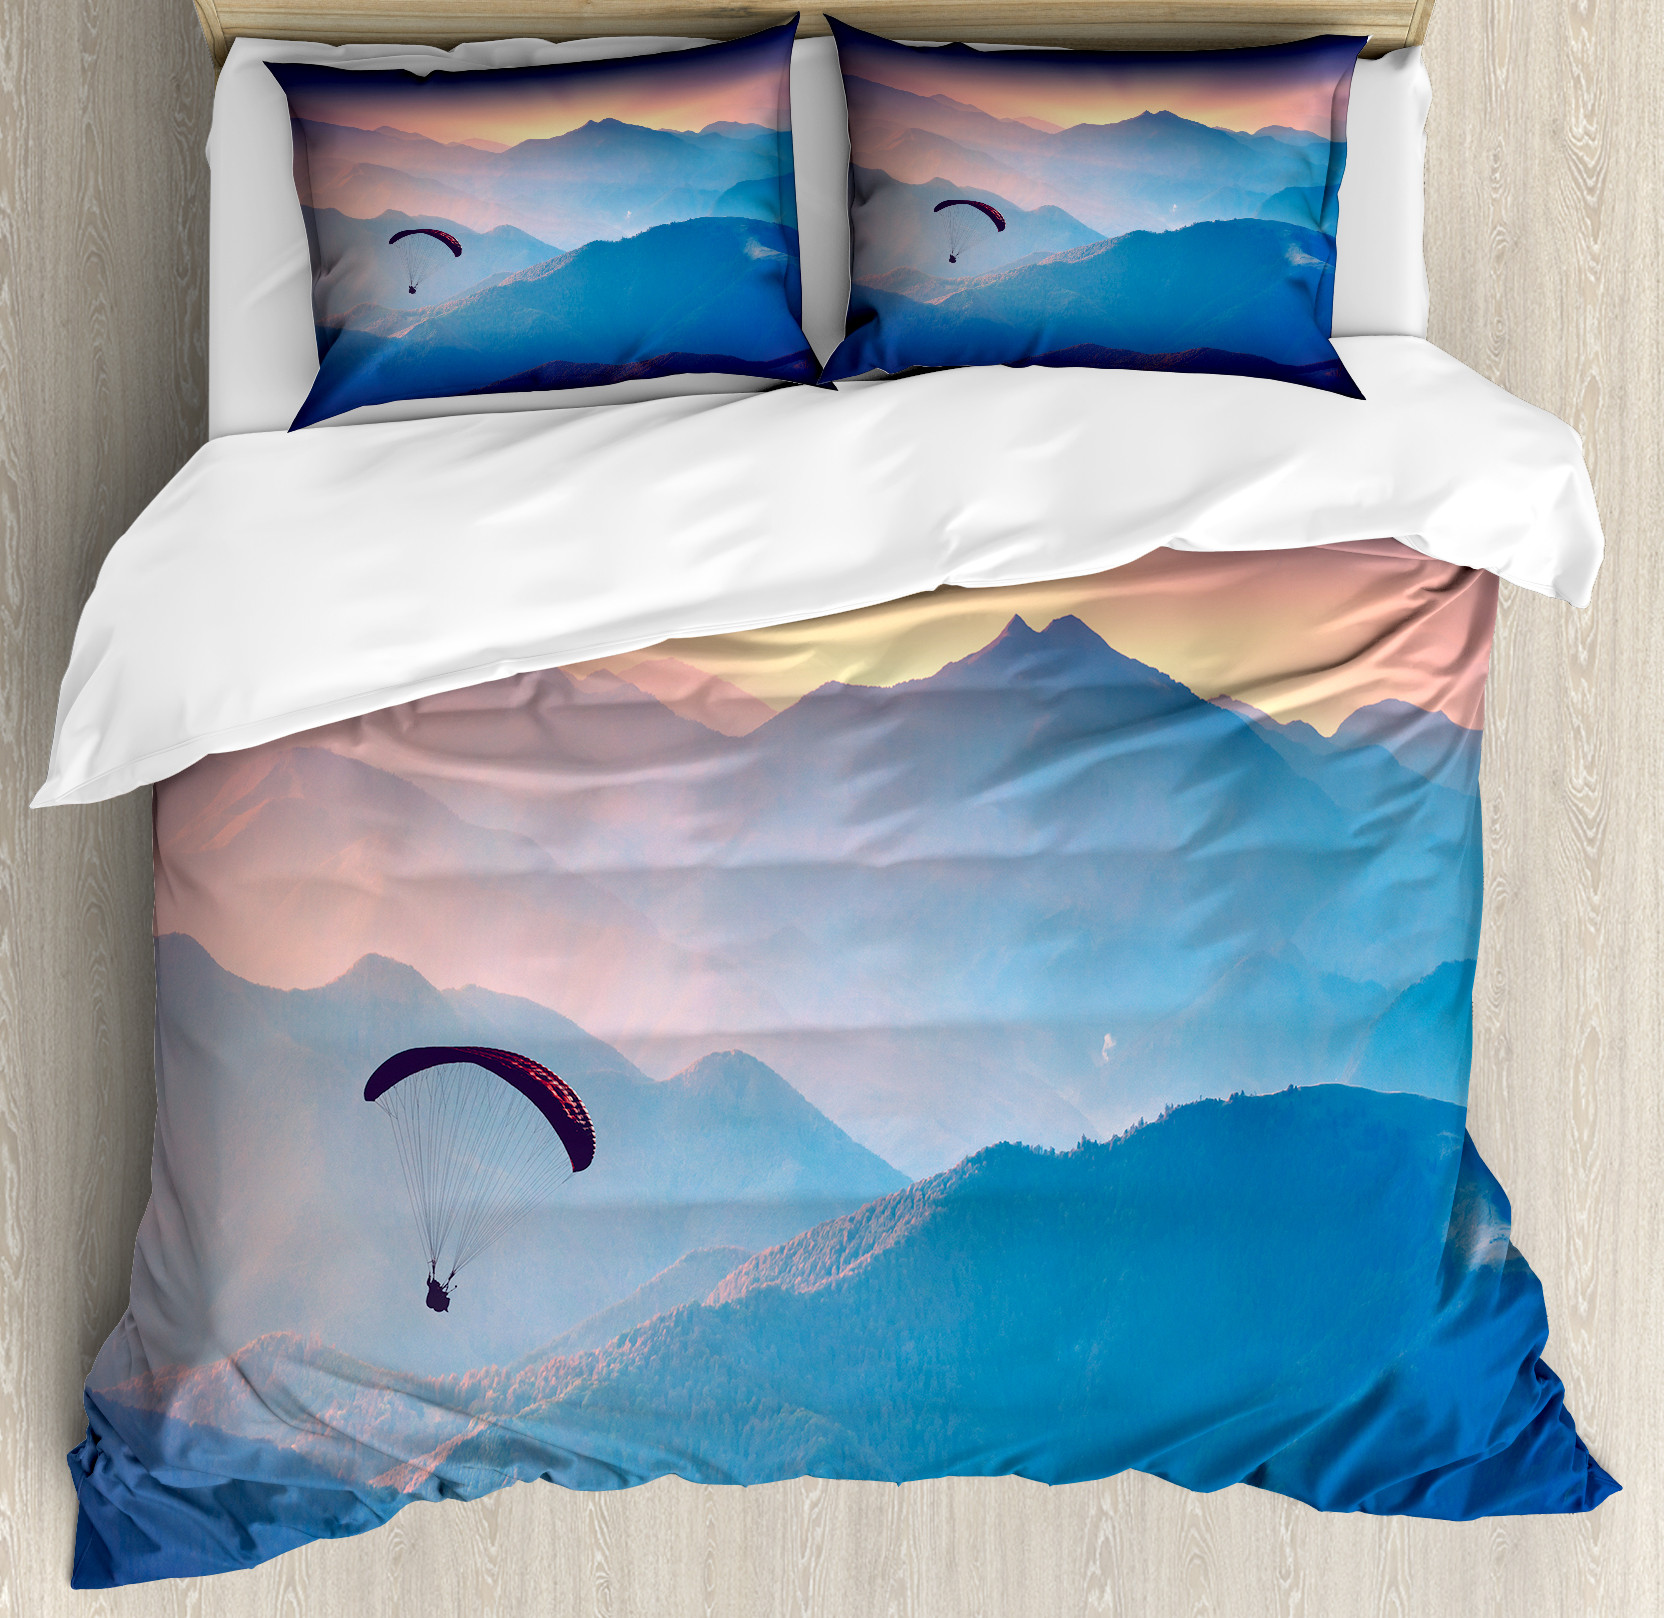 Sports Duvet Cover Set, Paraglide Flying over Majestic Mountains Morning Valley Sunrise Sports Freedom Theme, Decorative 3 Piece Bedding Set with 2 Pillow Shams, Queen Size, Blue Pink, by Ambesonne - image 1 of 3